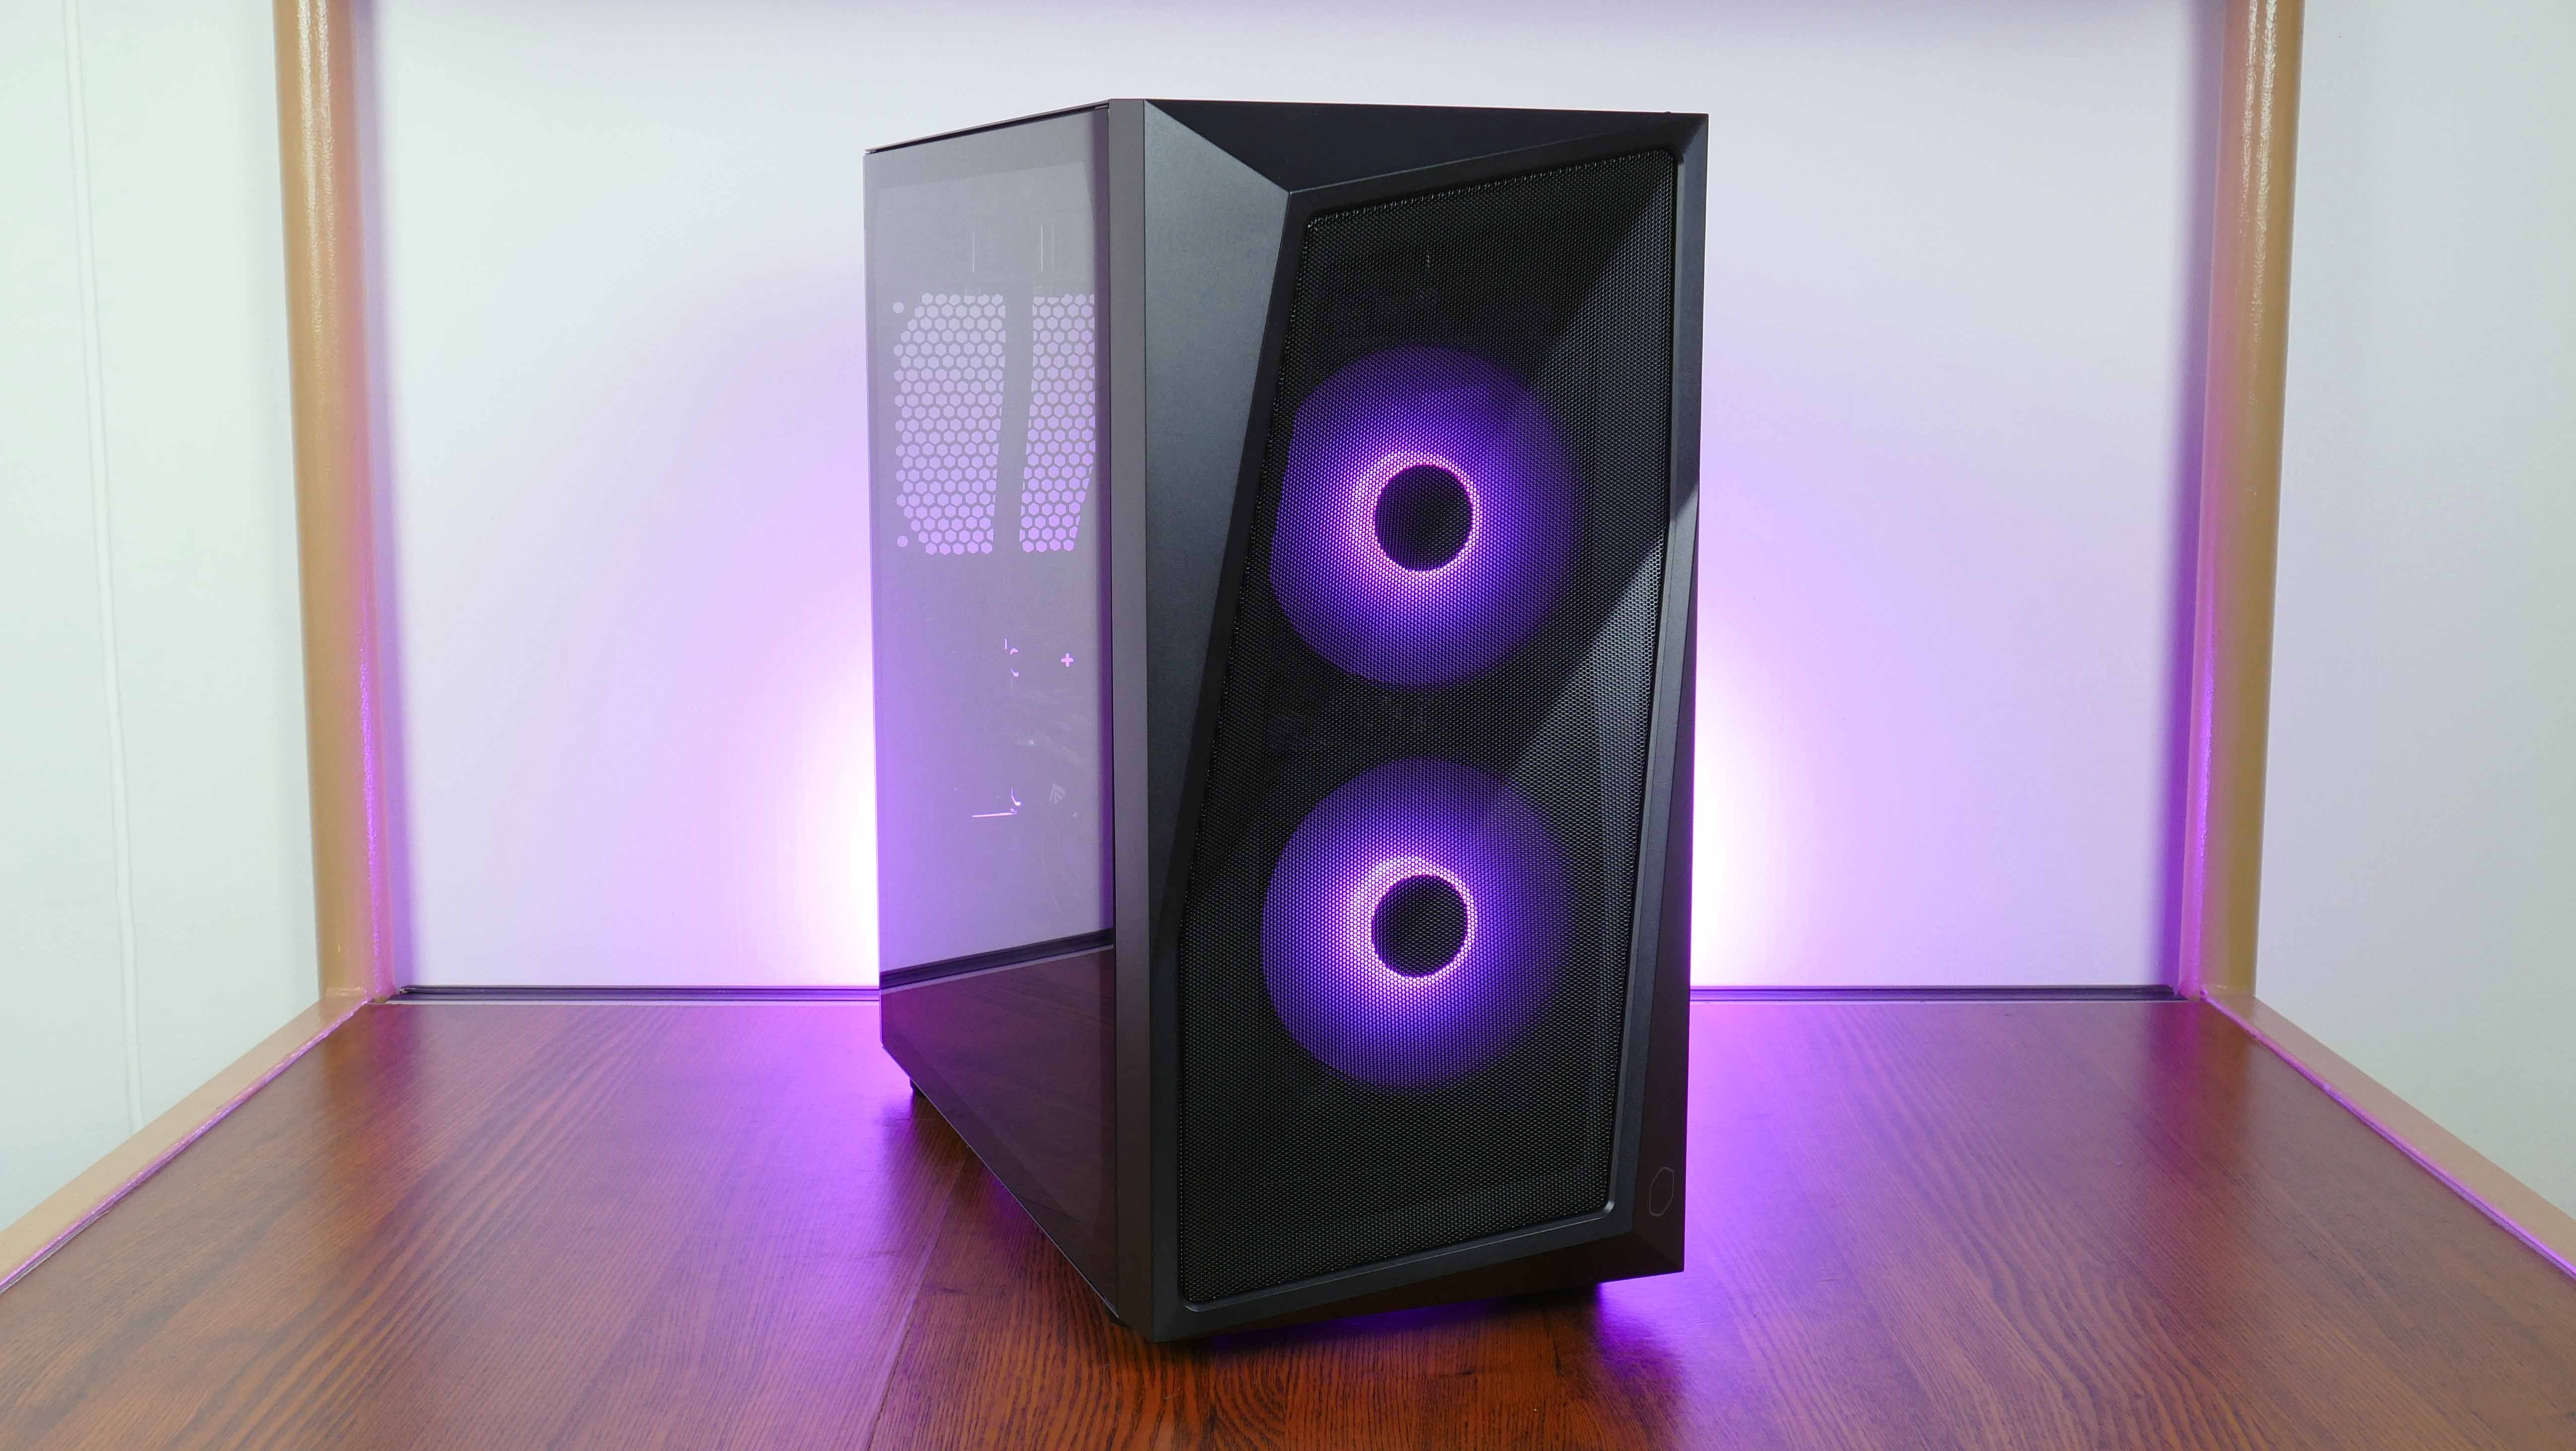 Cooler Master CMP 320 Featured Image